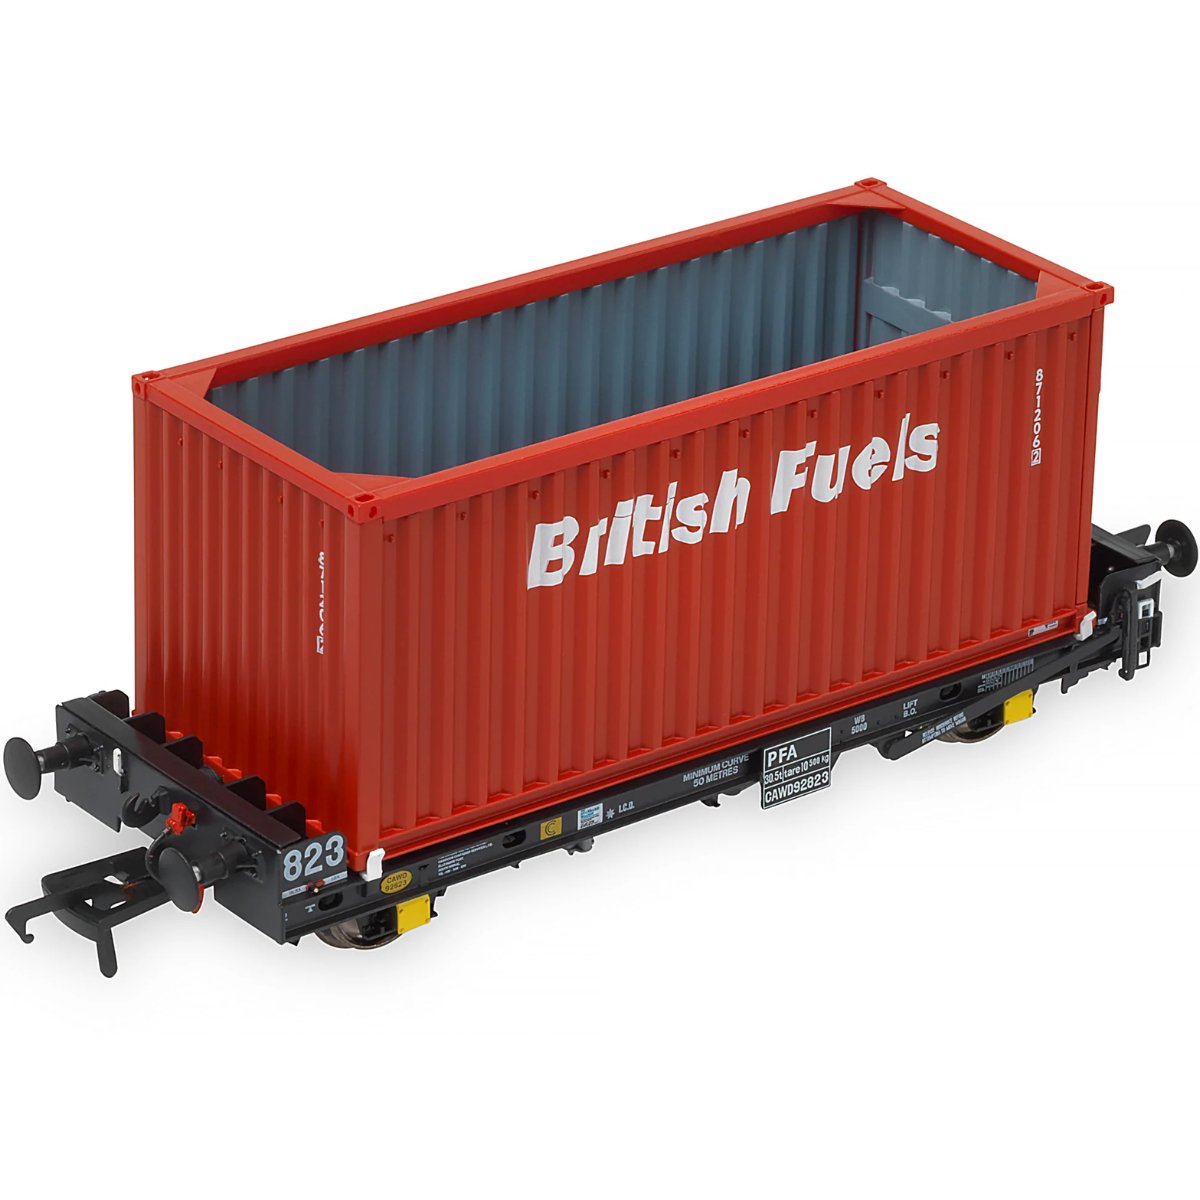 Accurascale PFA - British Fuels Coal Containers I - Phillips Hobbies